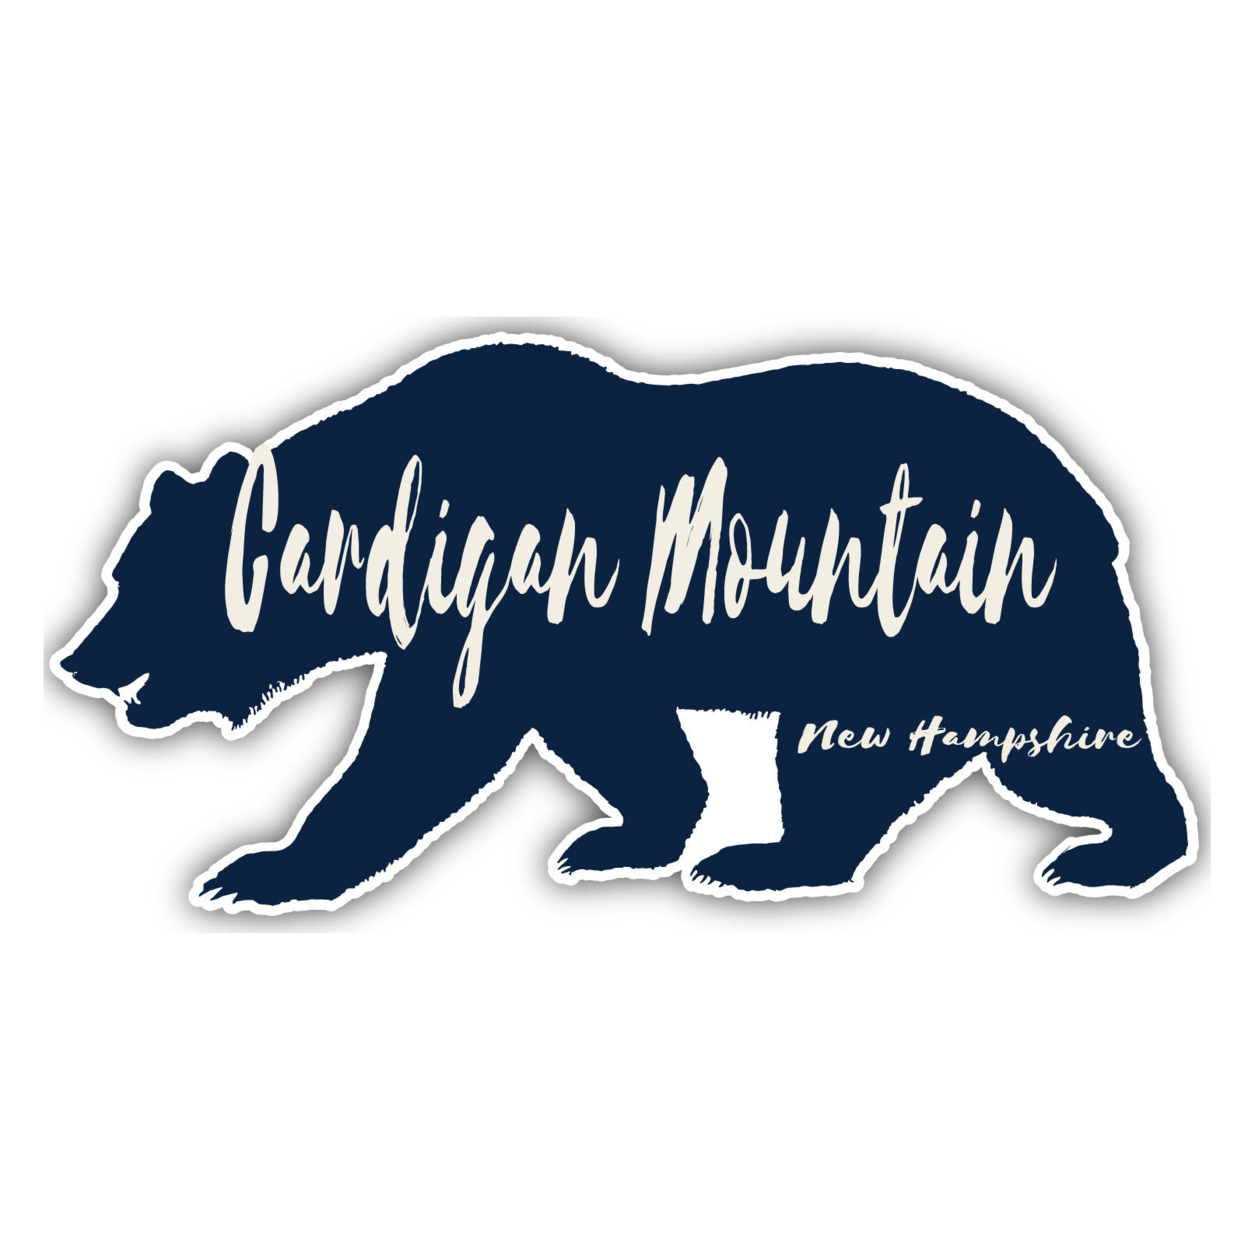 Cardigan Mountain New Hampshire Souvenir Decorative Stickers (Choose Theme And Size) - 4-Pack, 4-Inch, Bear